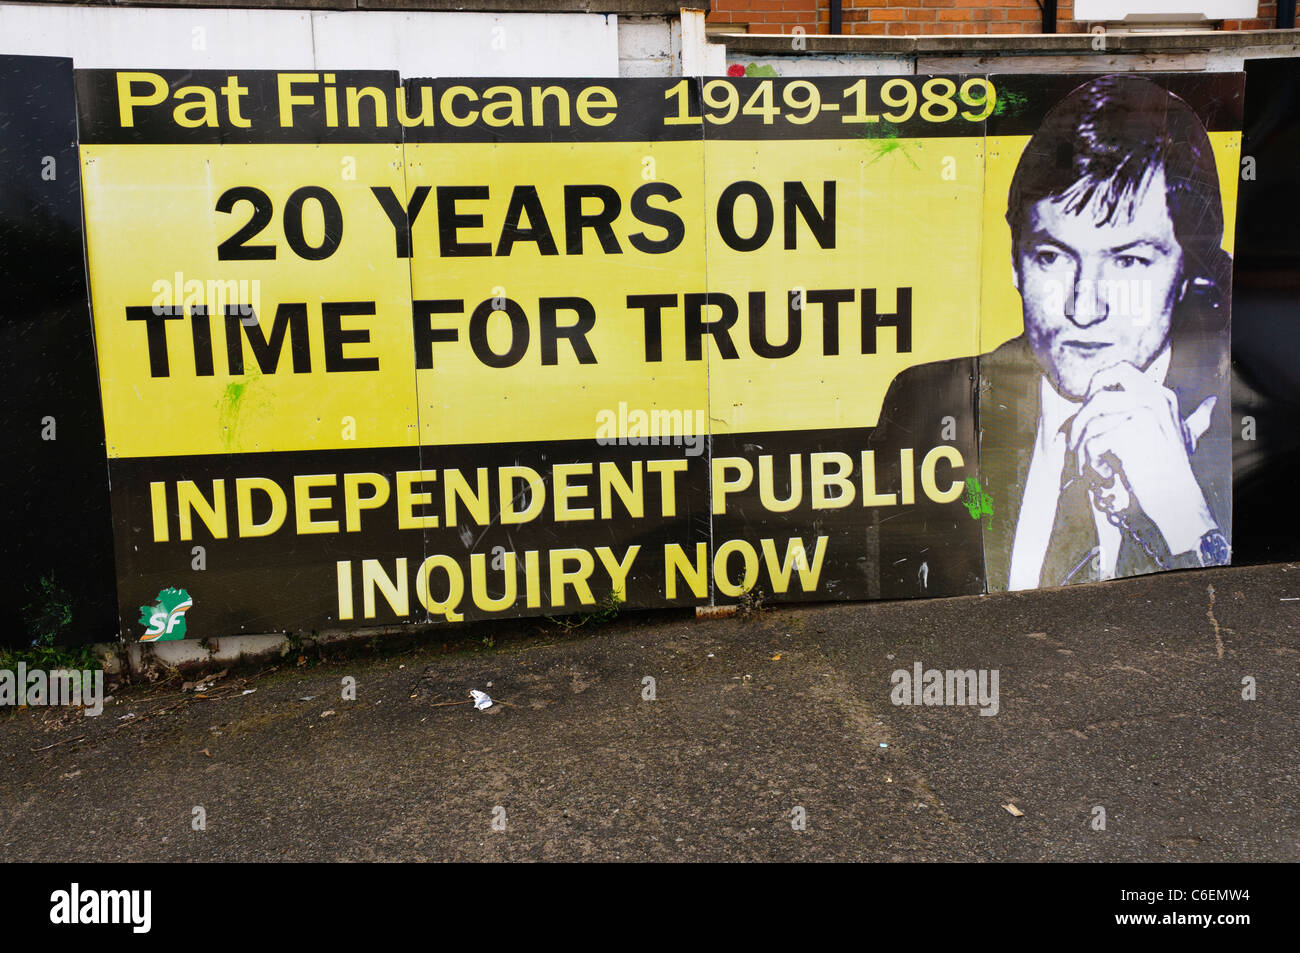 Mural calling for a public inquiry for Pat Finucane, a Belfast solicitor who was murdered by loyalists in 1989. Stock Photo